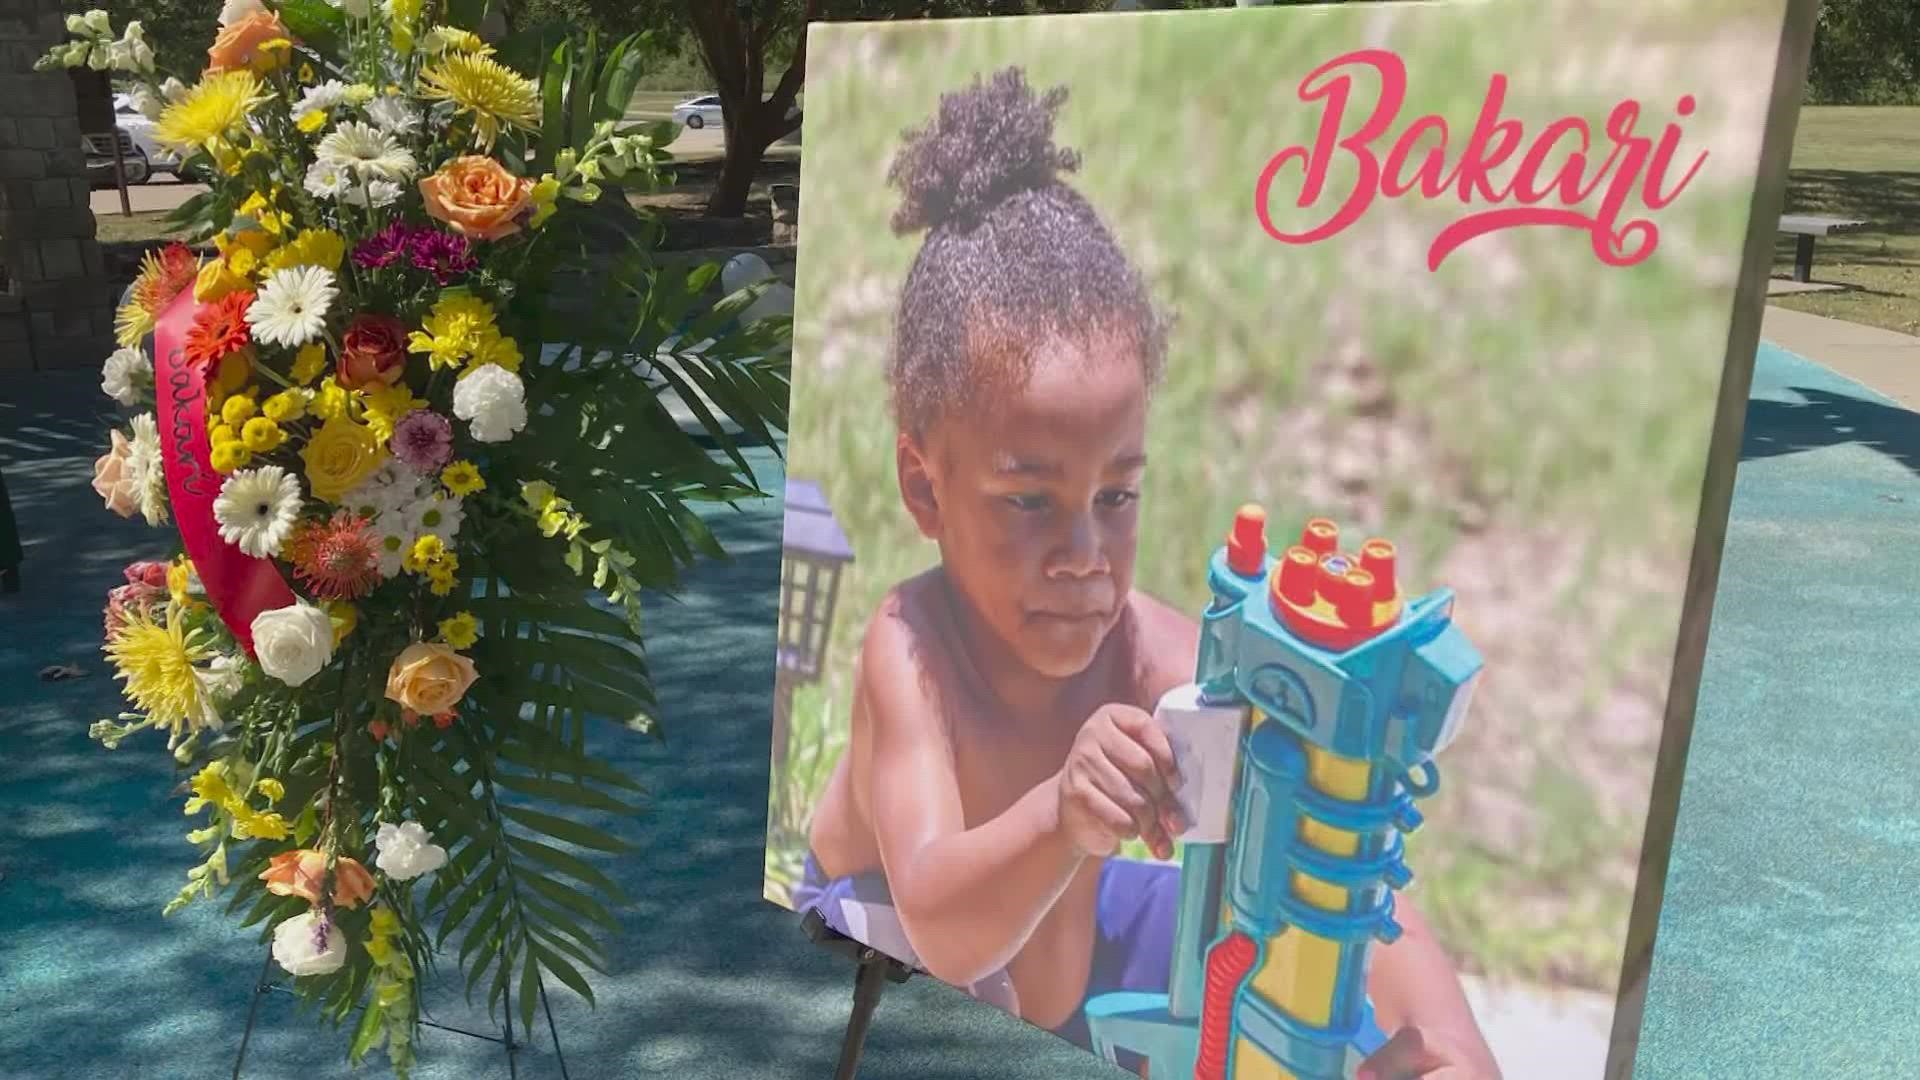 Bakari Williams, 3, became ill in early September. His parents said it was the day after playing at the splash pad at Don Misenhimer Park.